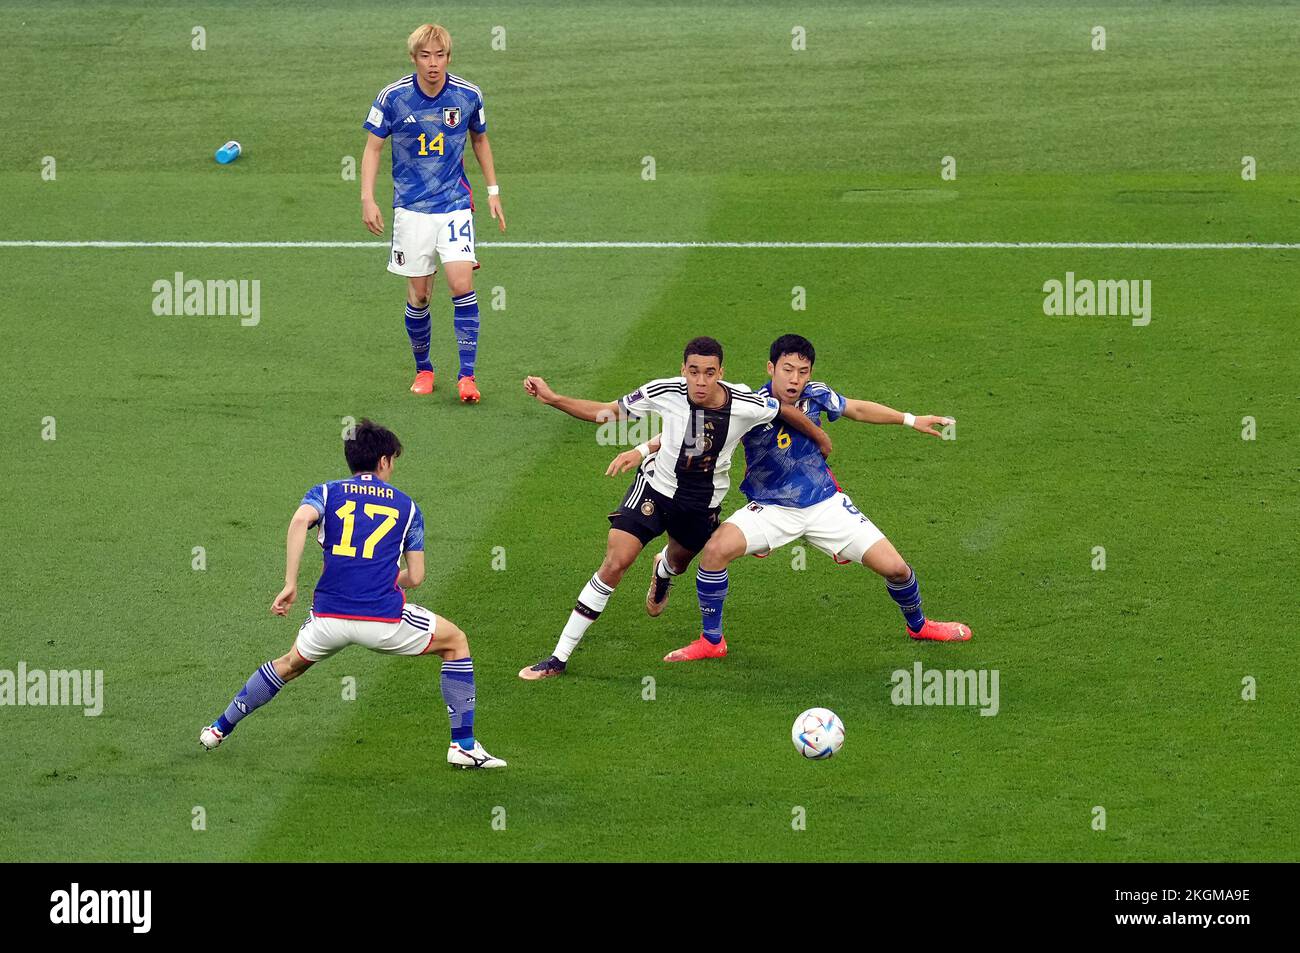 Germany’s Jamal Musiala and Japan’s Wataru Endo (right) battle for the ball during the FIFA World Cup Group E match at the Khalifa International Stadium, Doha, Qatar. Picture date: Wednesday November 23, 2022. Stock Photo